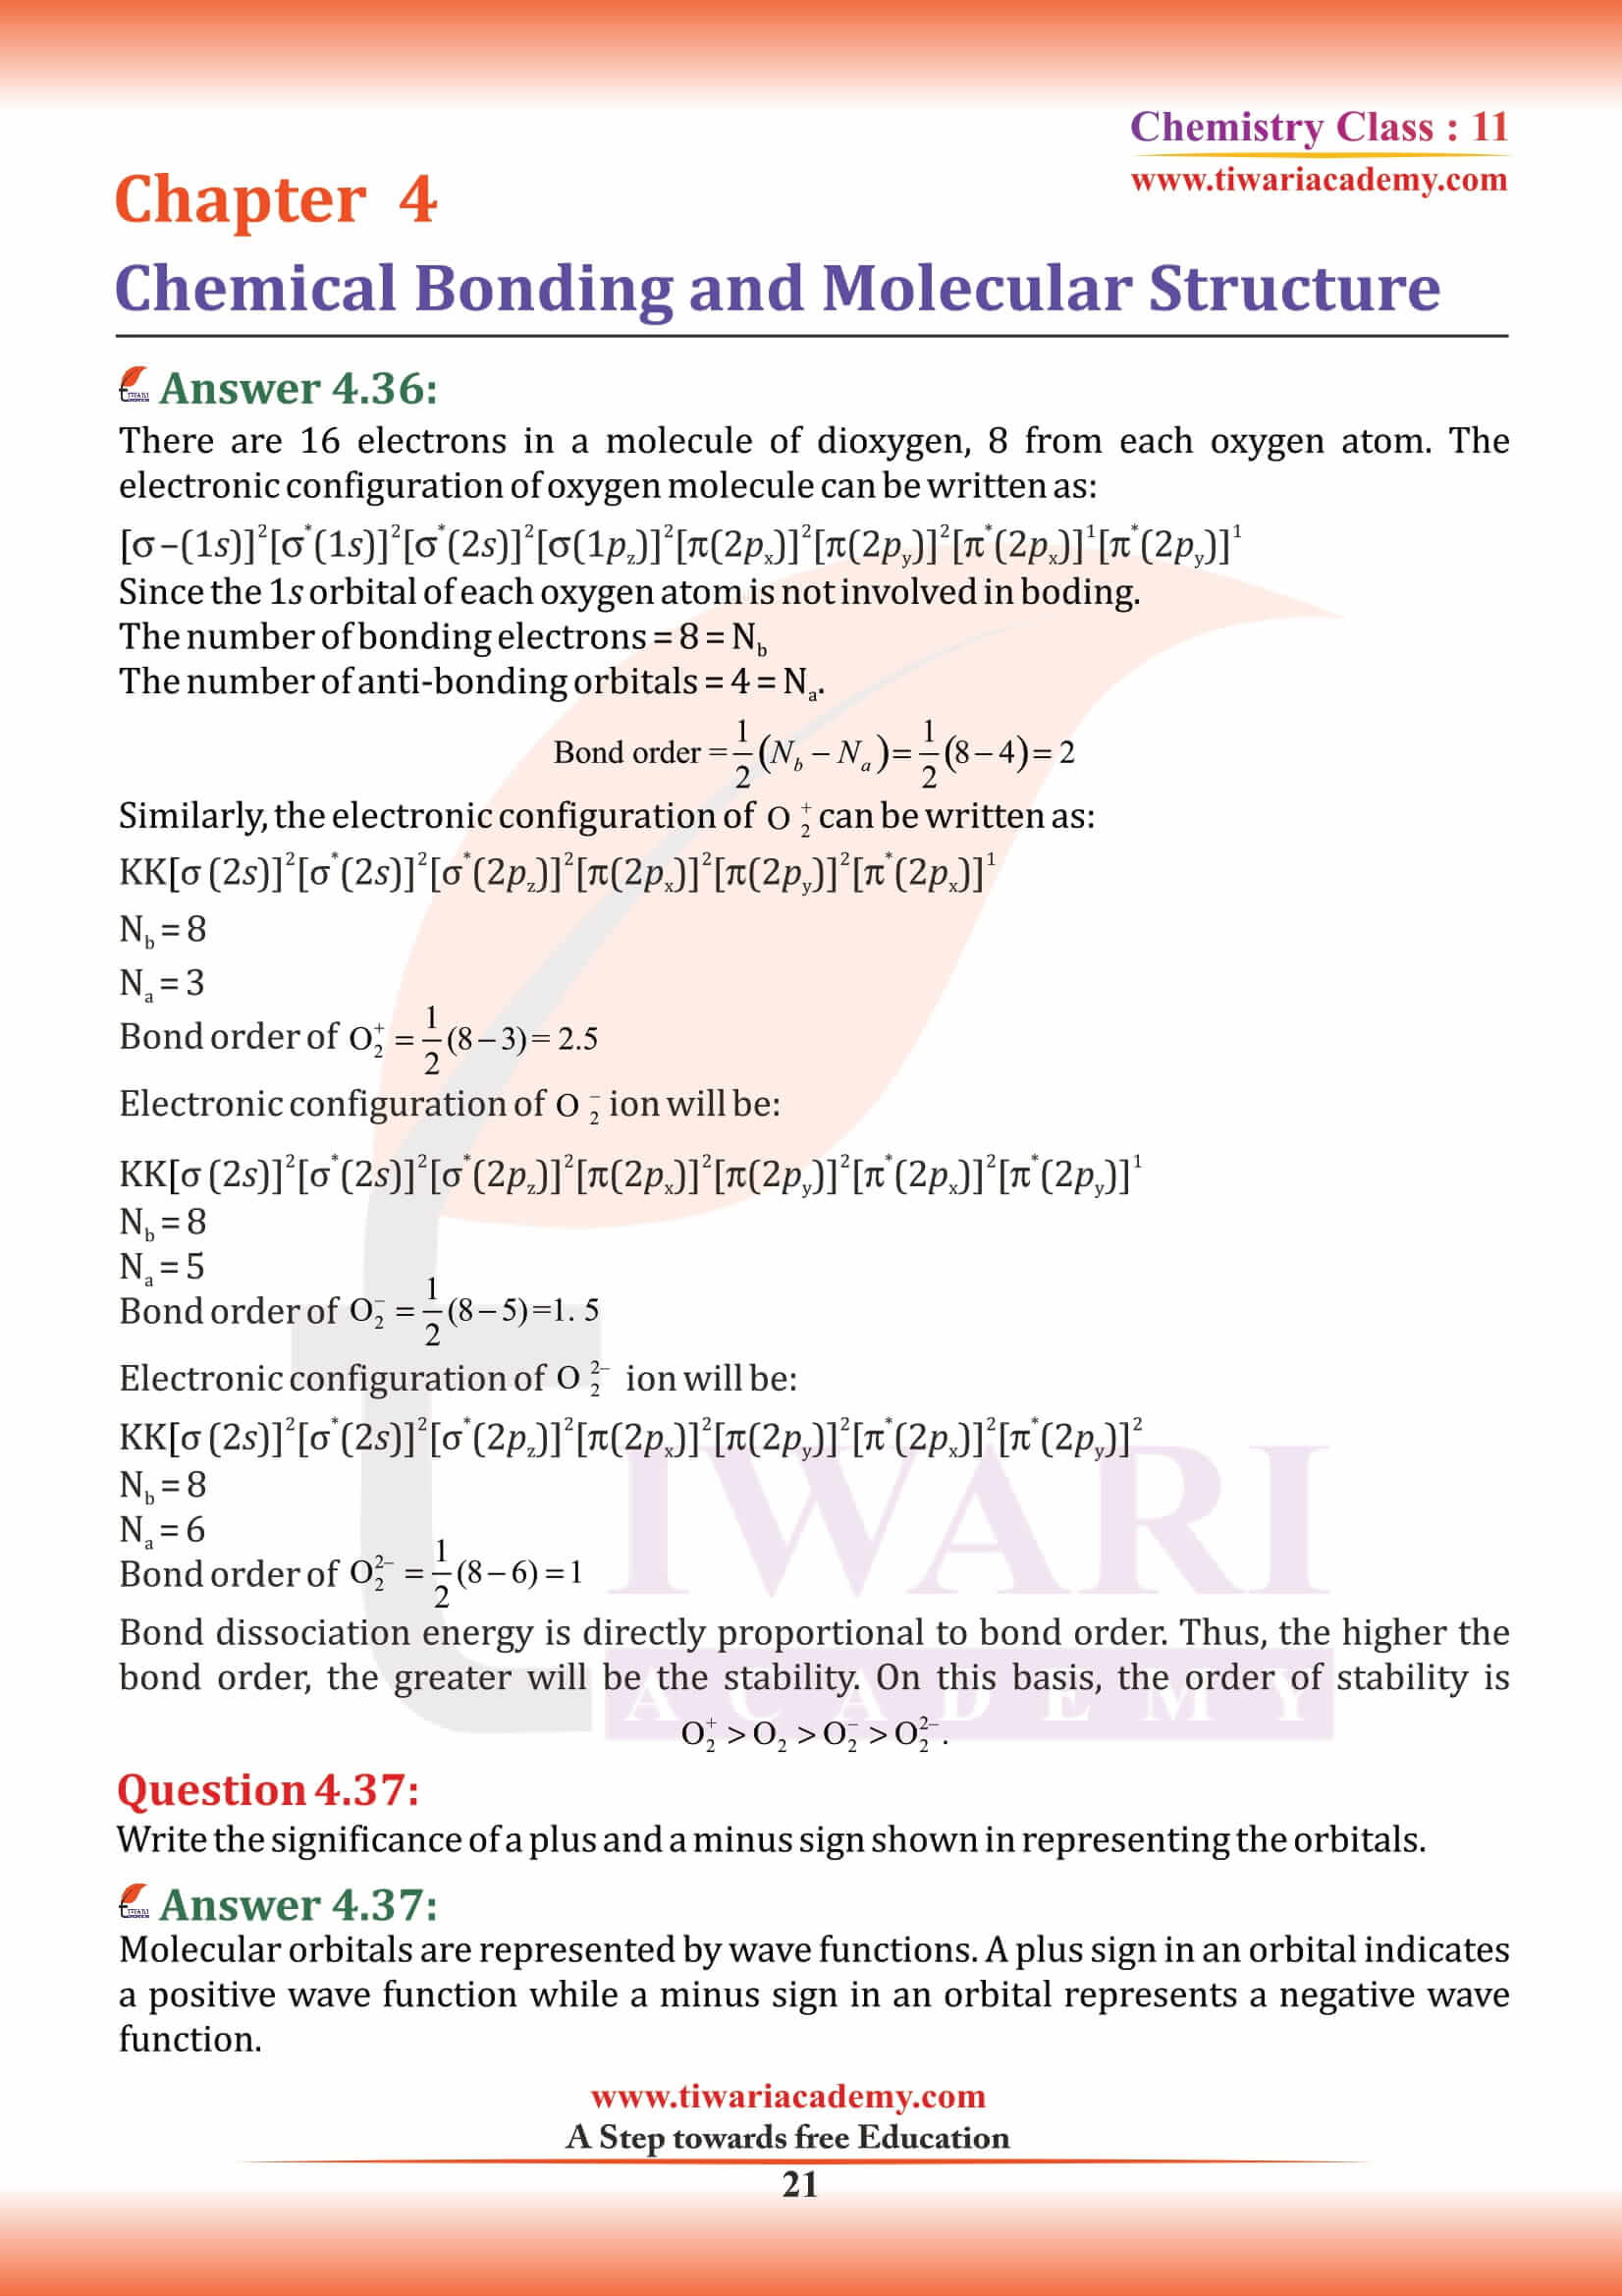 Class 11 Chemistry Chapter 4 MCQ